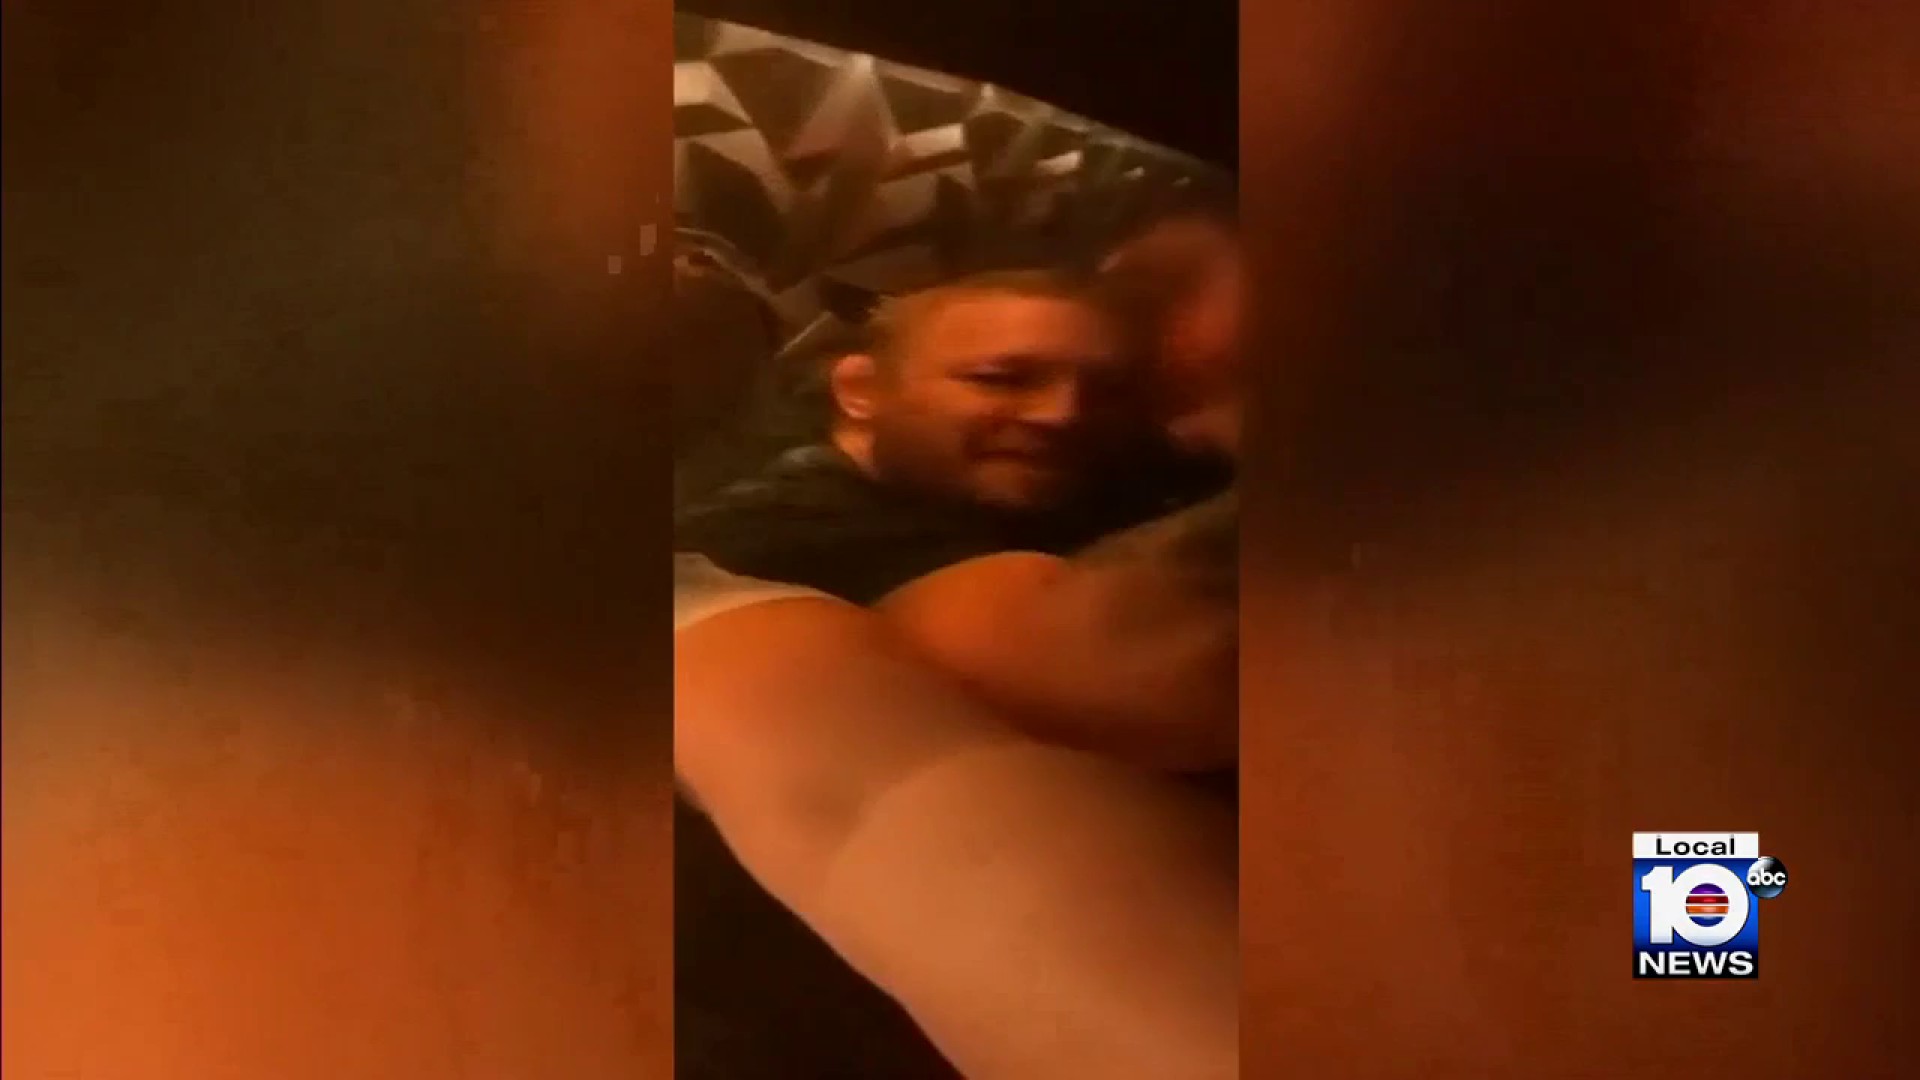 Webcam Forced Sex - More video surfaces of Conor McGregor with woman who alleges rape